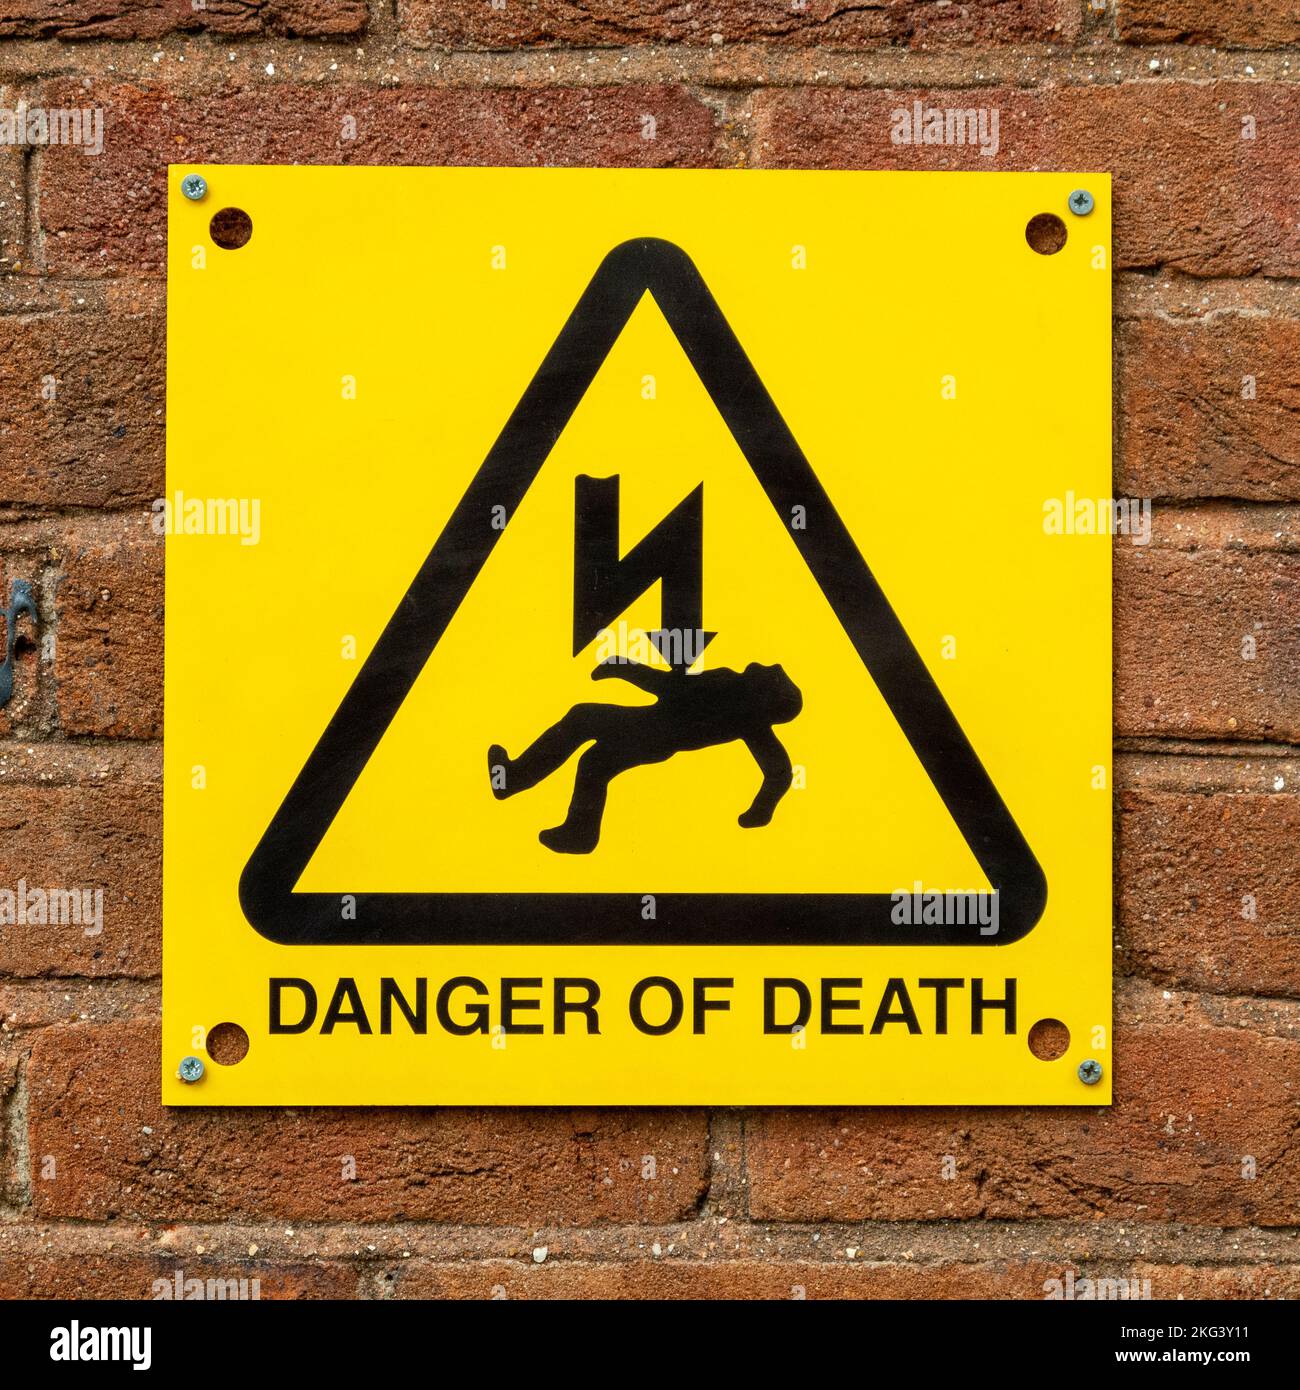 danger of death sign Stock Photo